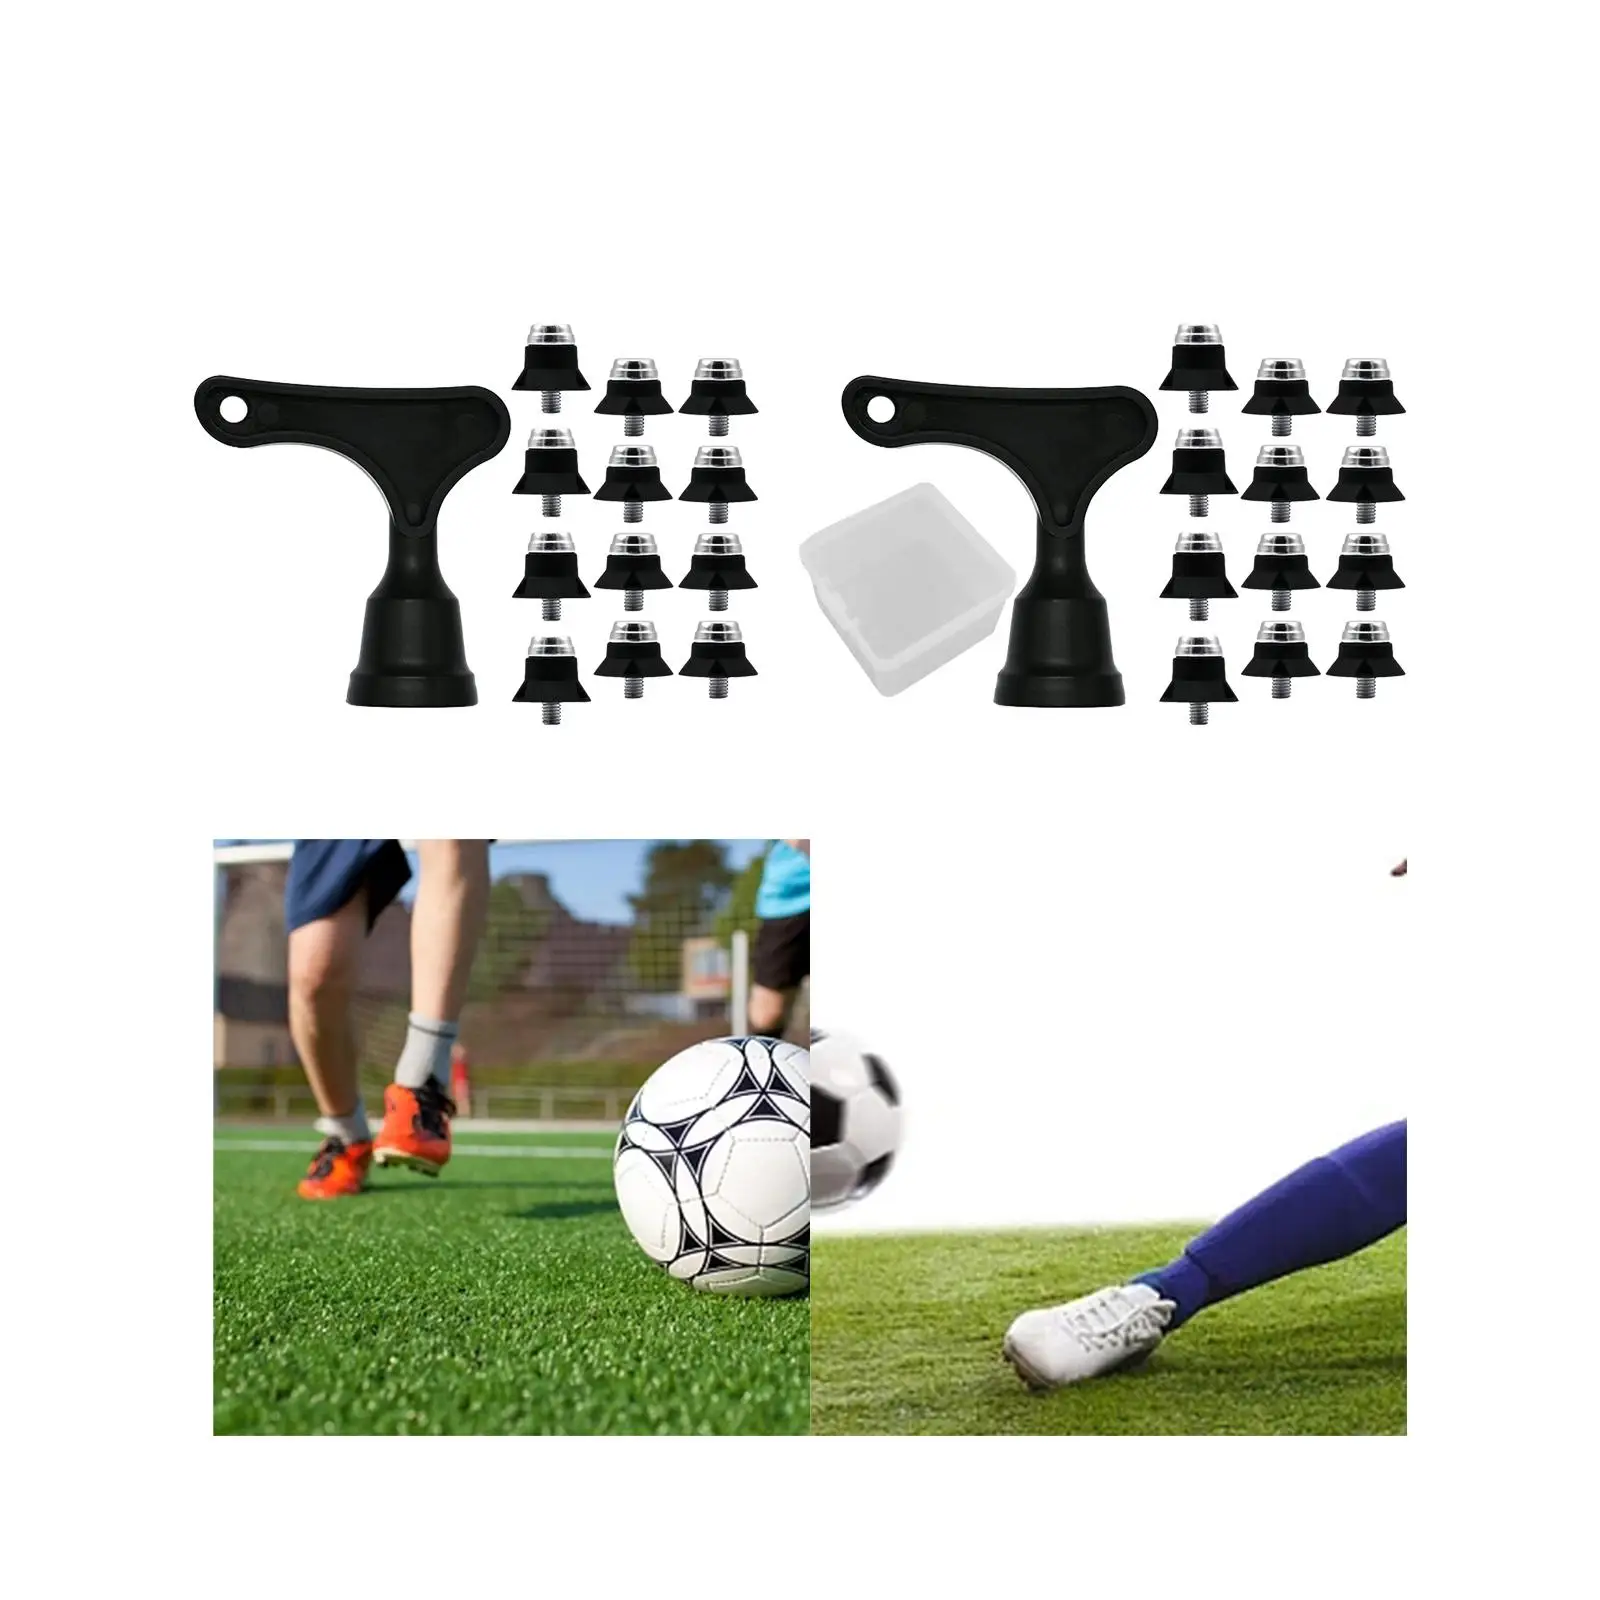 12x Track Shoes Spikes Stable Turf Non Slip M5 Threading Screw Soccer Boot Cleats for Indoor Outdoor Sports Competition Training